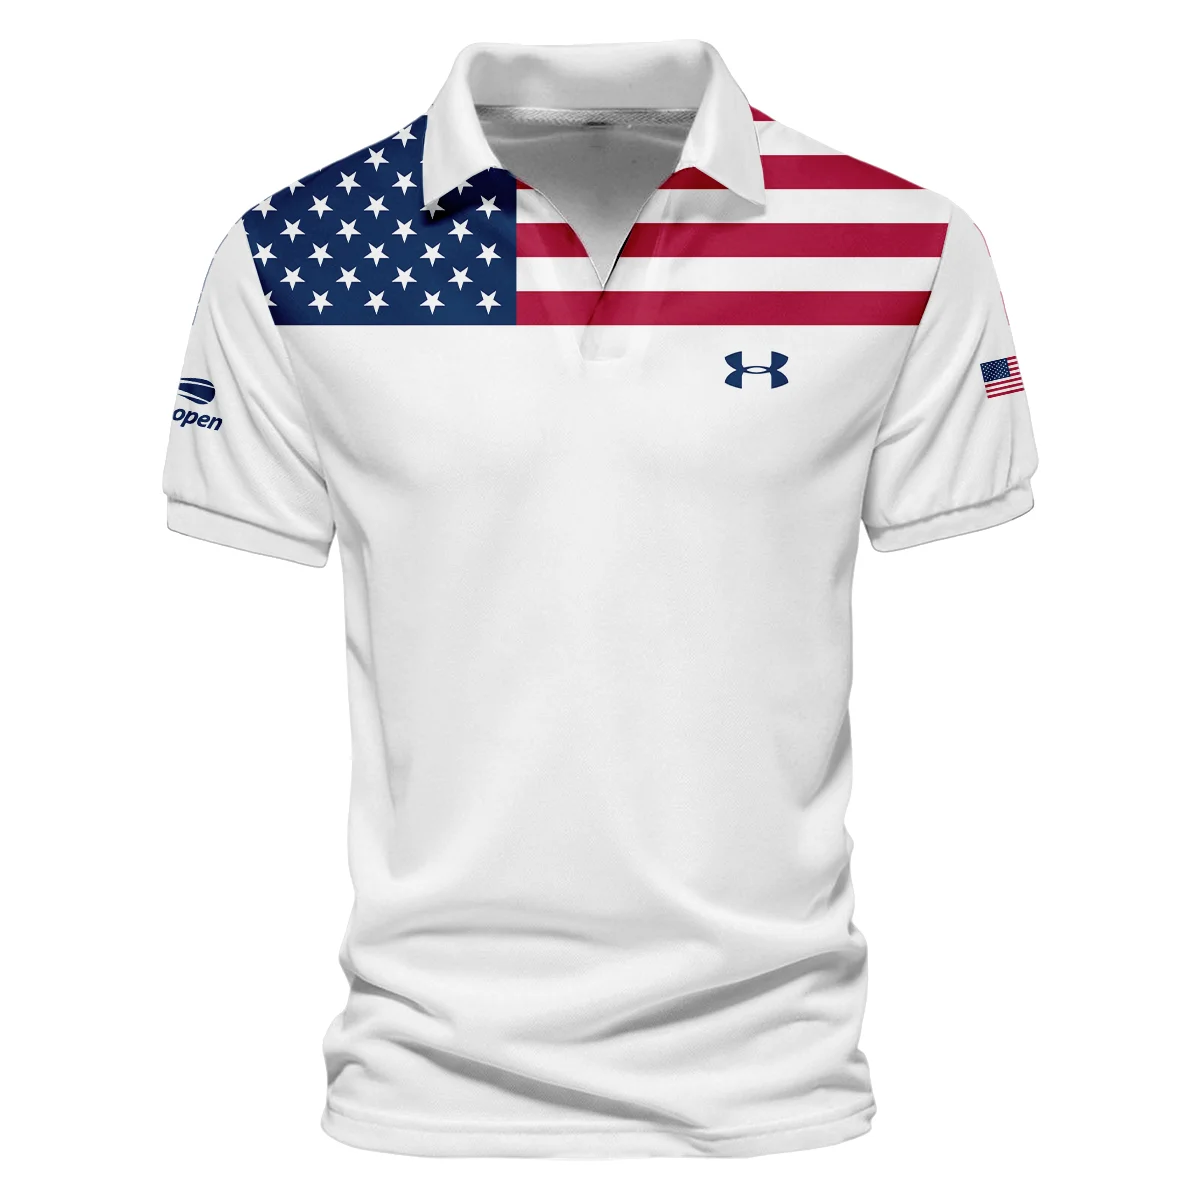 US Open Tennis Champions Under Armour USA Flag White Hoodie Shirt Style Classic Hoodie Shirt